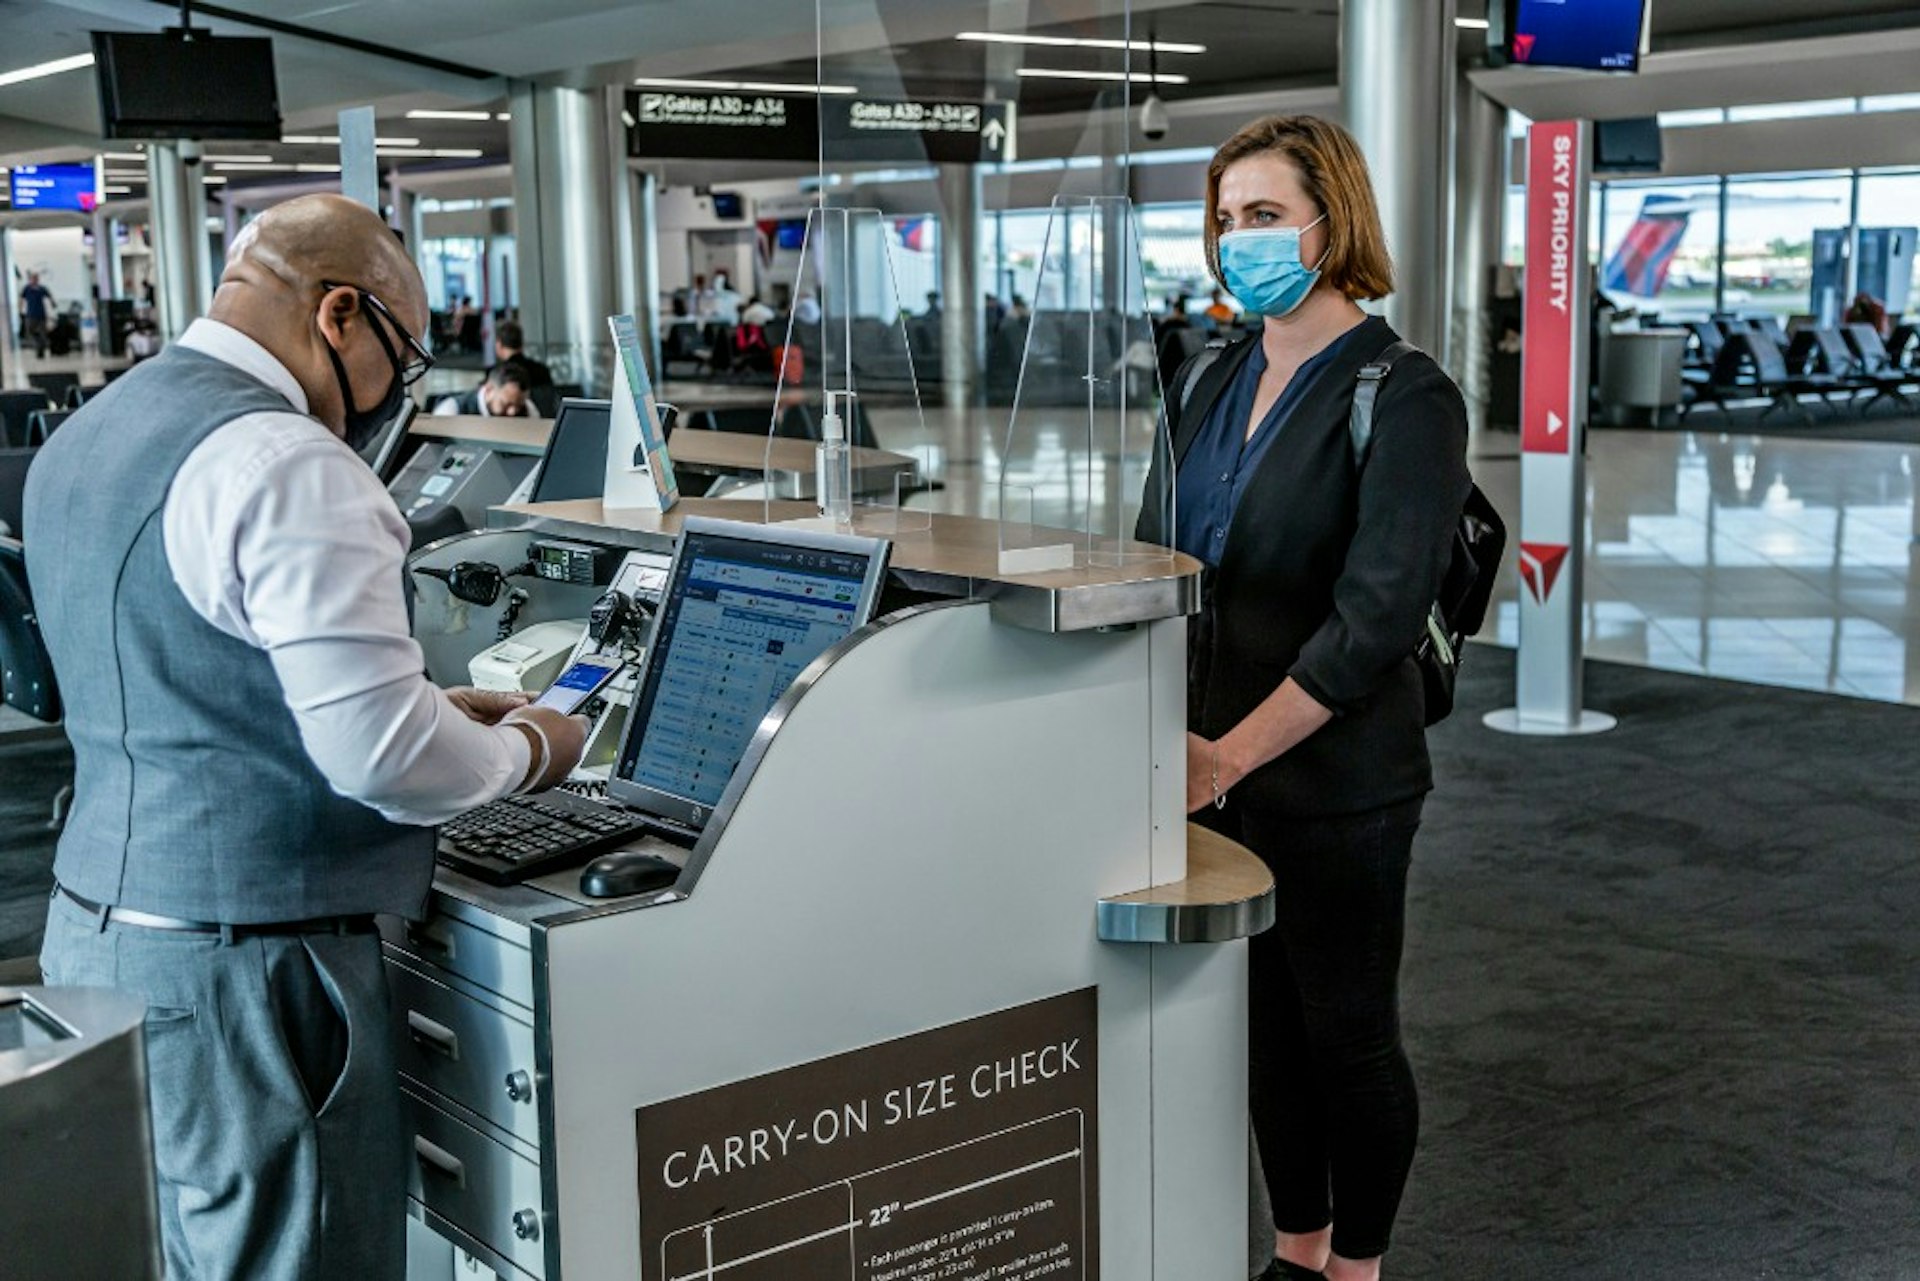 An attendant and passenger at the Delta check in desk